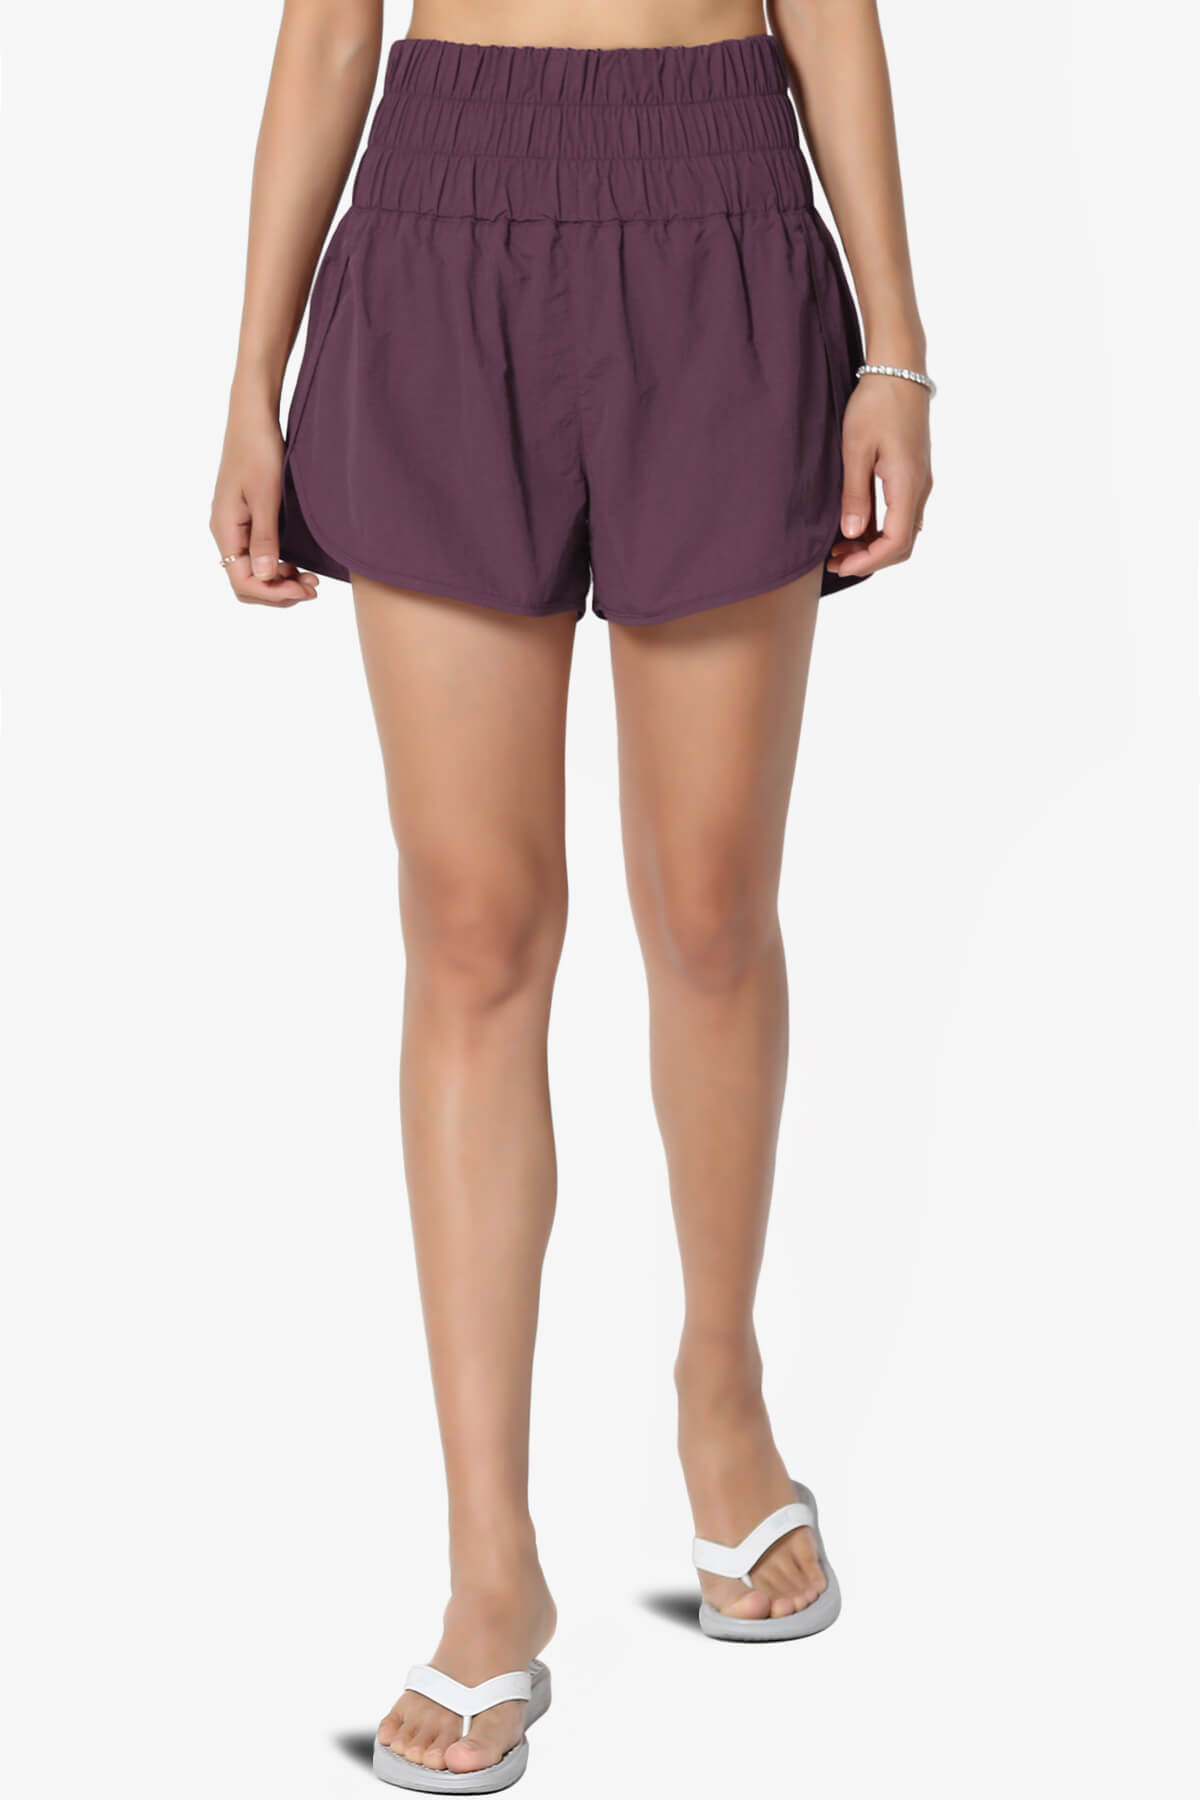 Load image into Gallery viewer, The Way Home Running Shorts DUSTY PLUM_1
